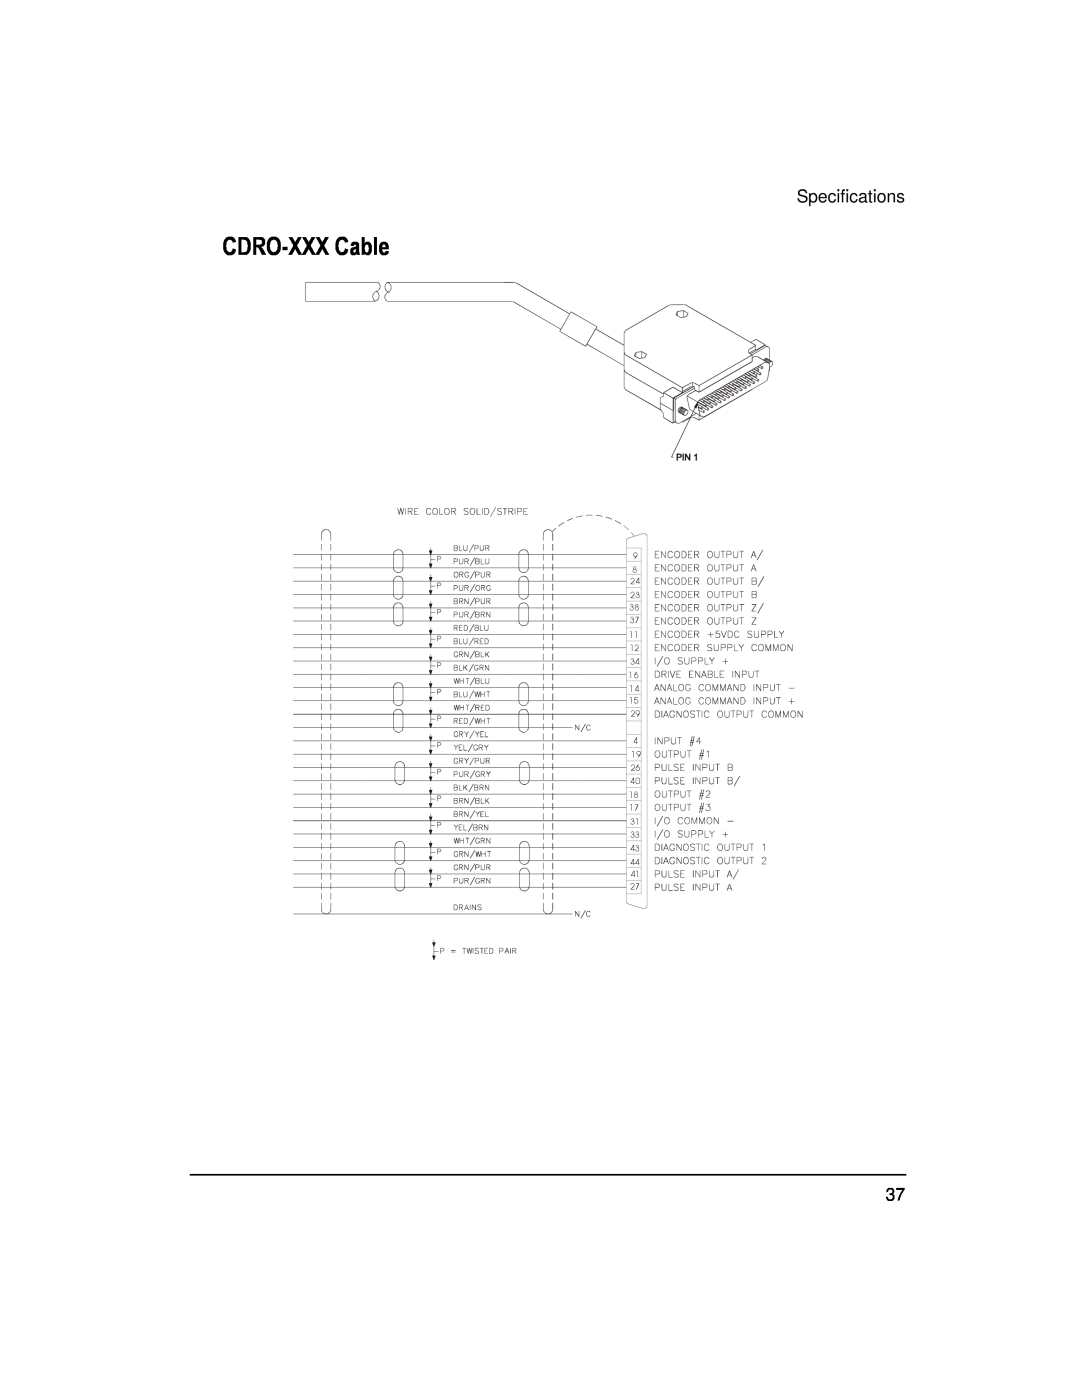 Emerson 400508-02 installation manual CDRO-XXX Cable, Specifications 